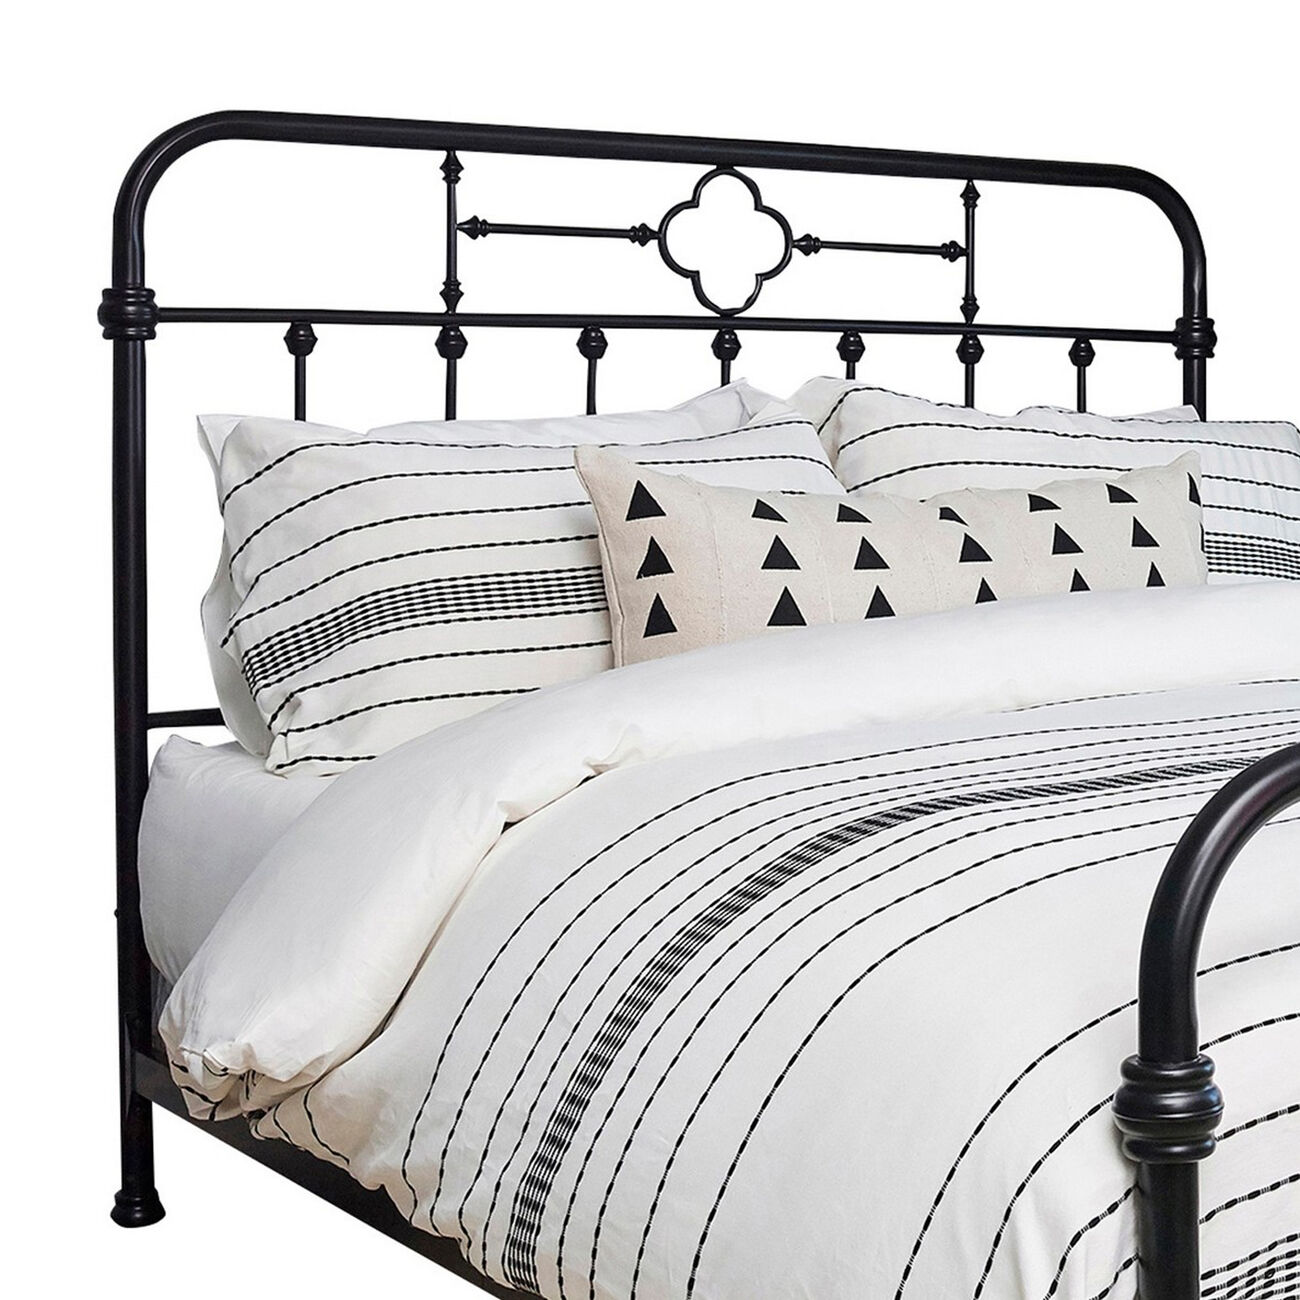 Pipe Design Metal Queen Headboard with Curved Corners, Black